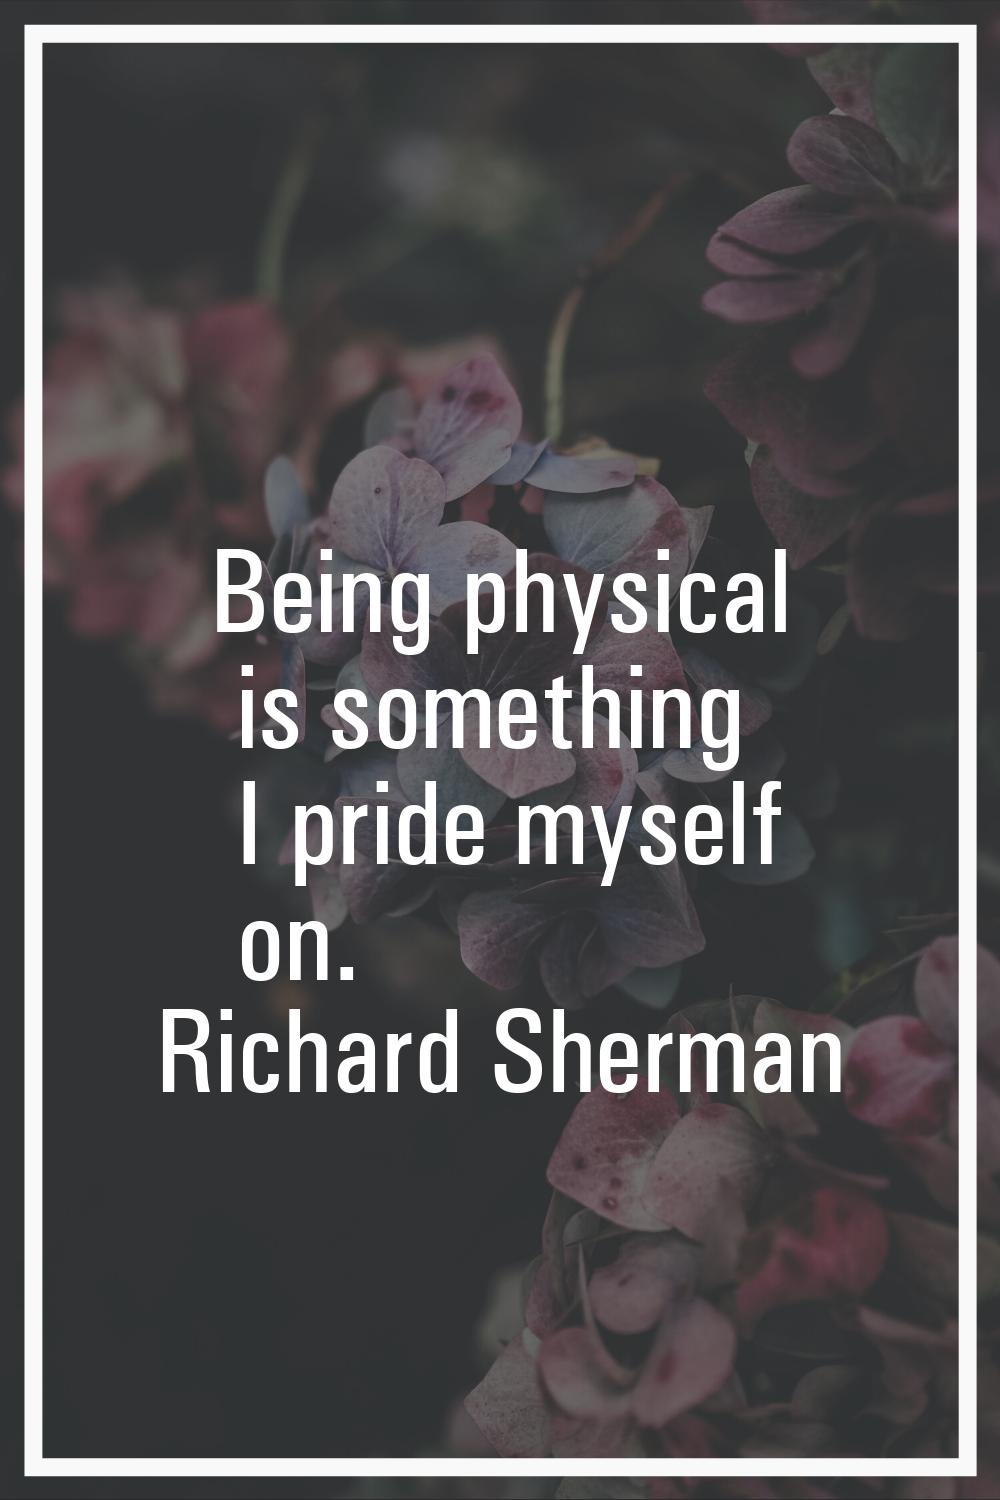 Being physical is something I pride myself on.